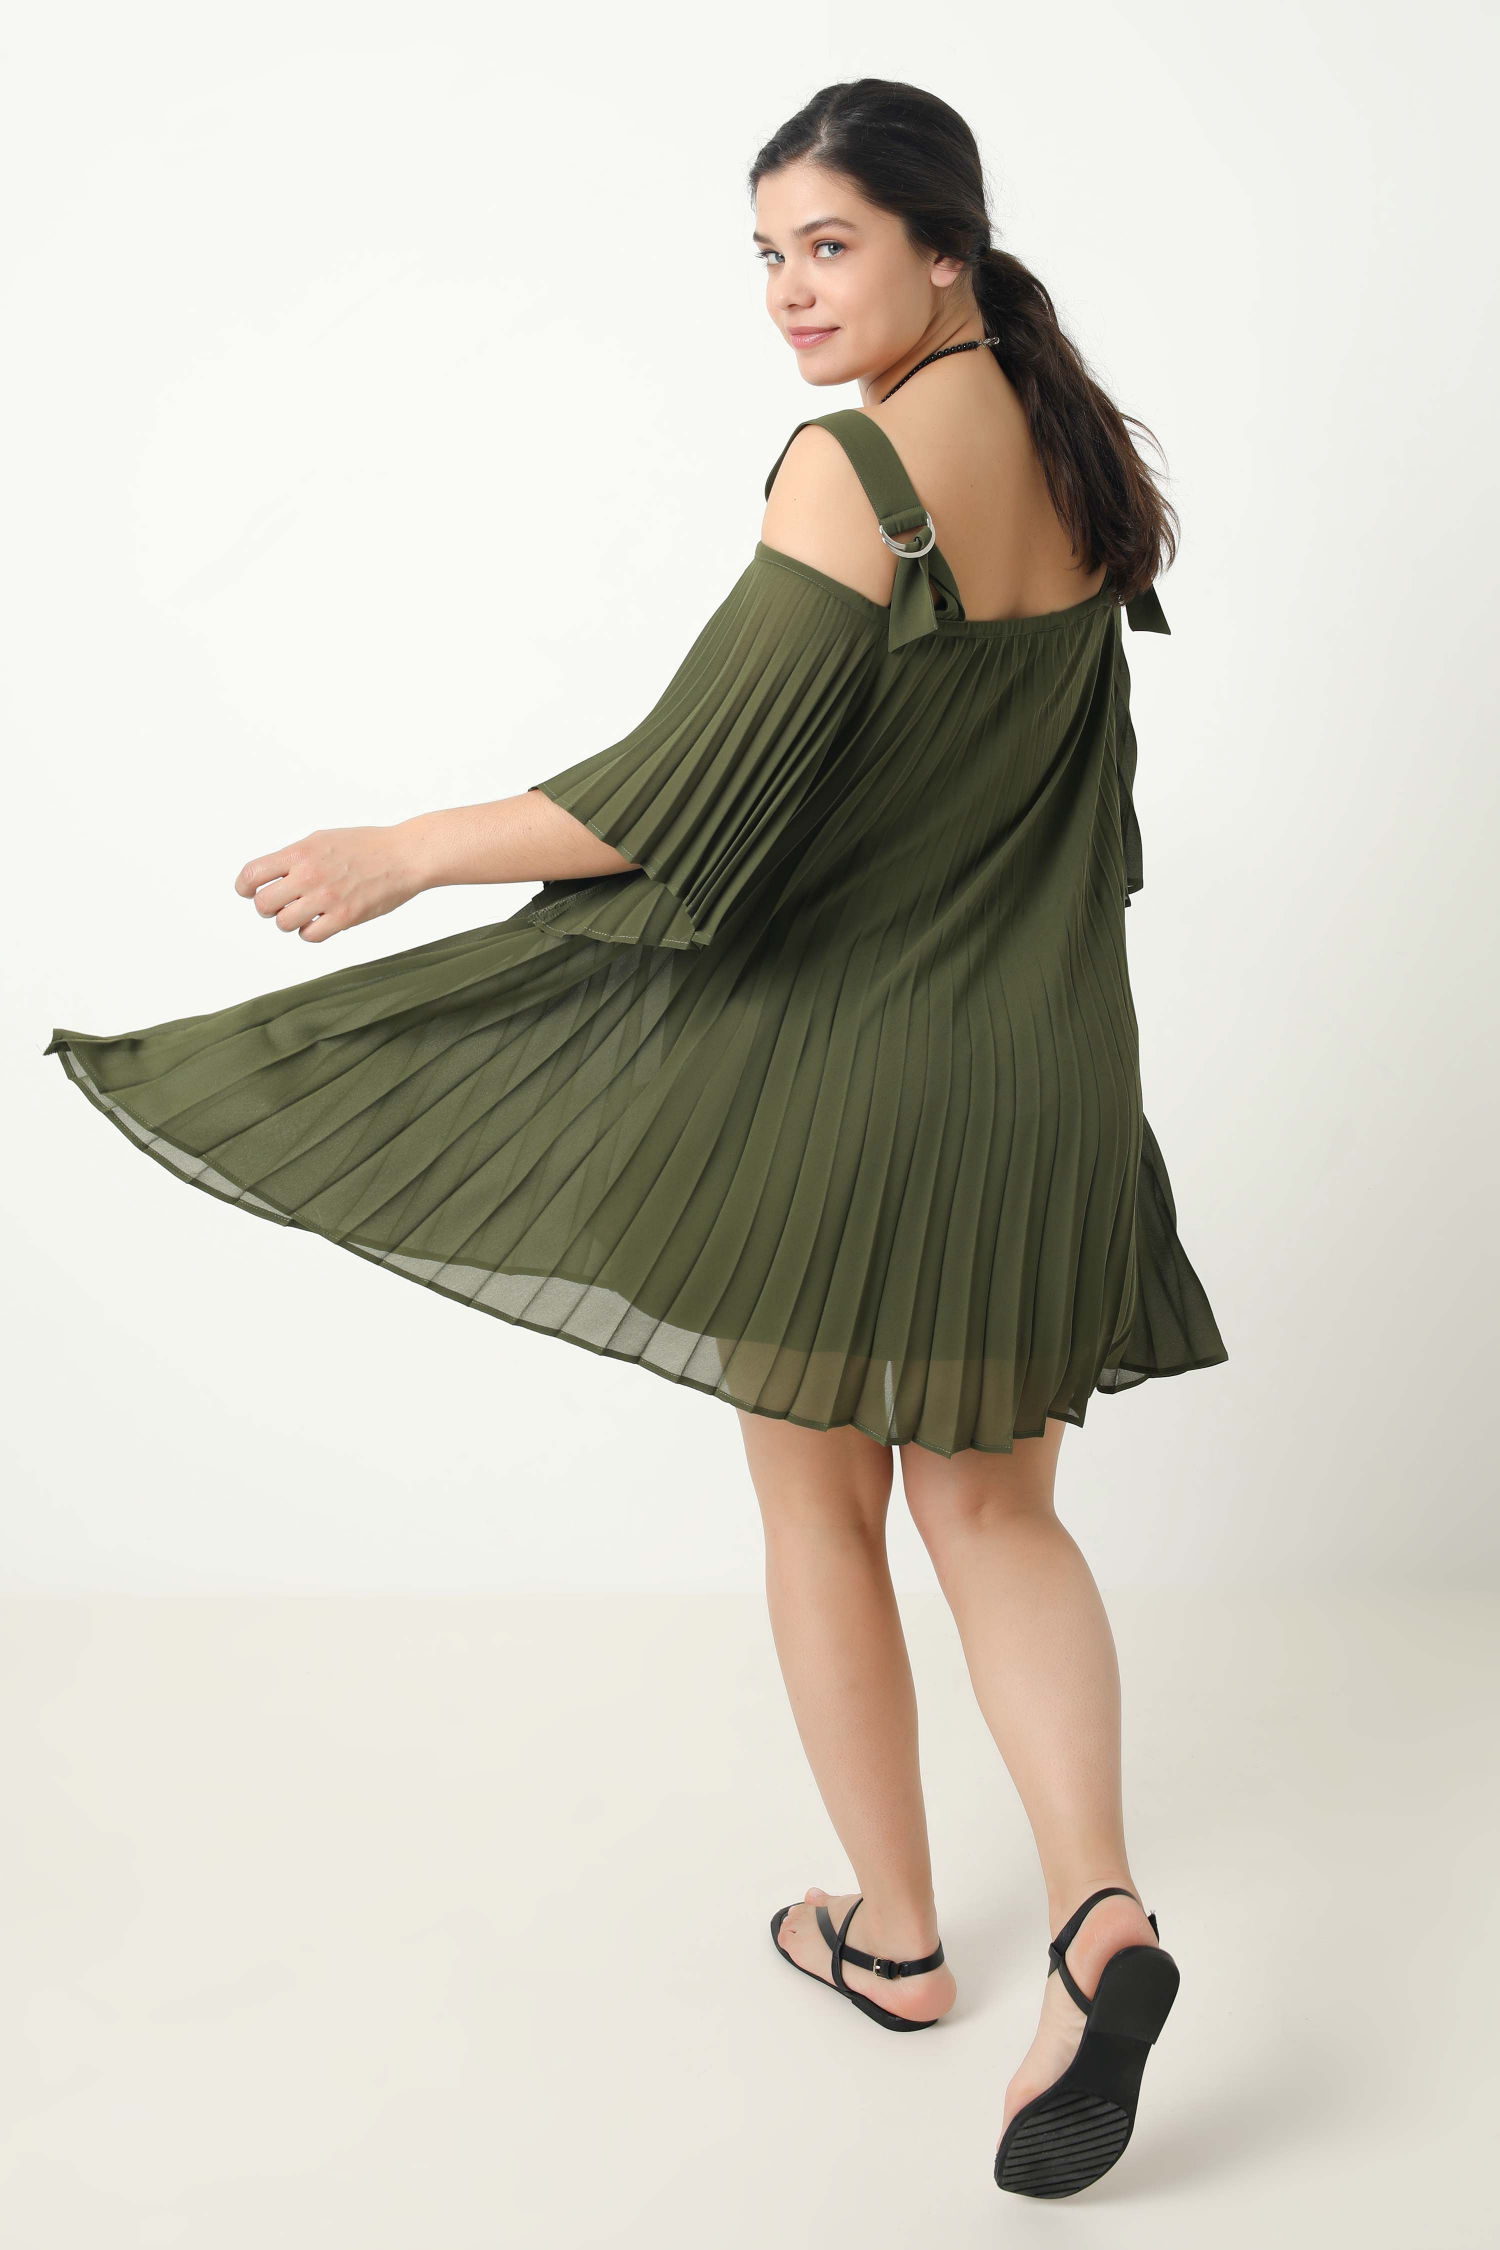 Short pleated tunic with straps in plain color